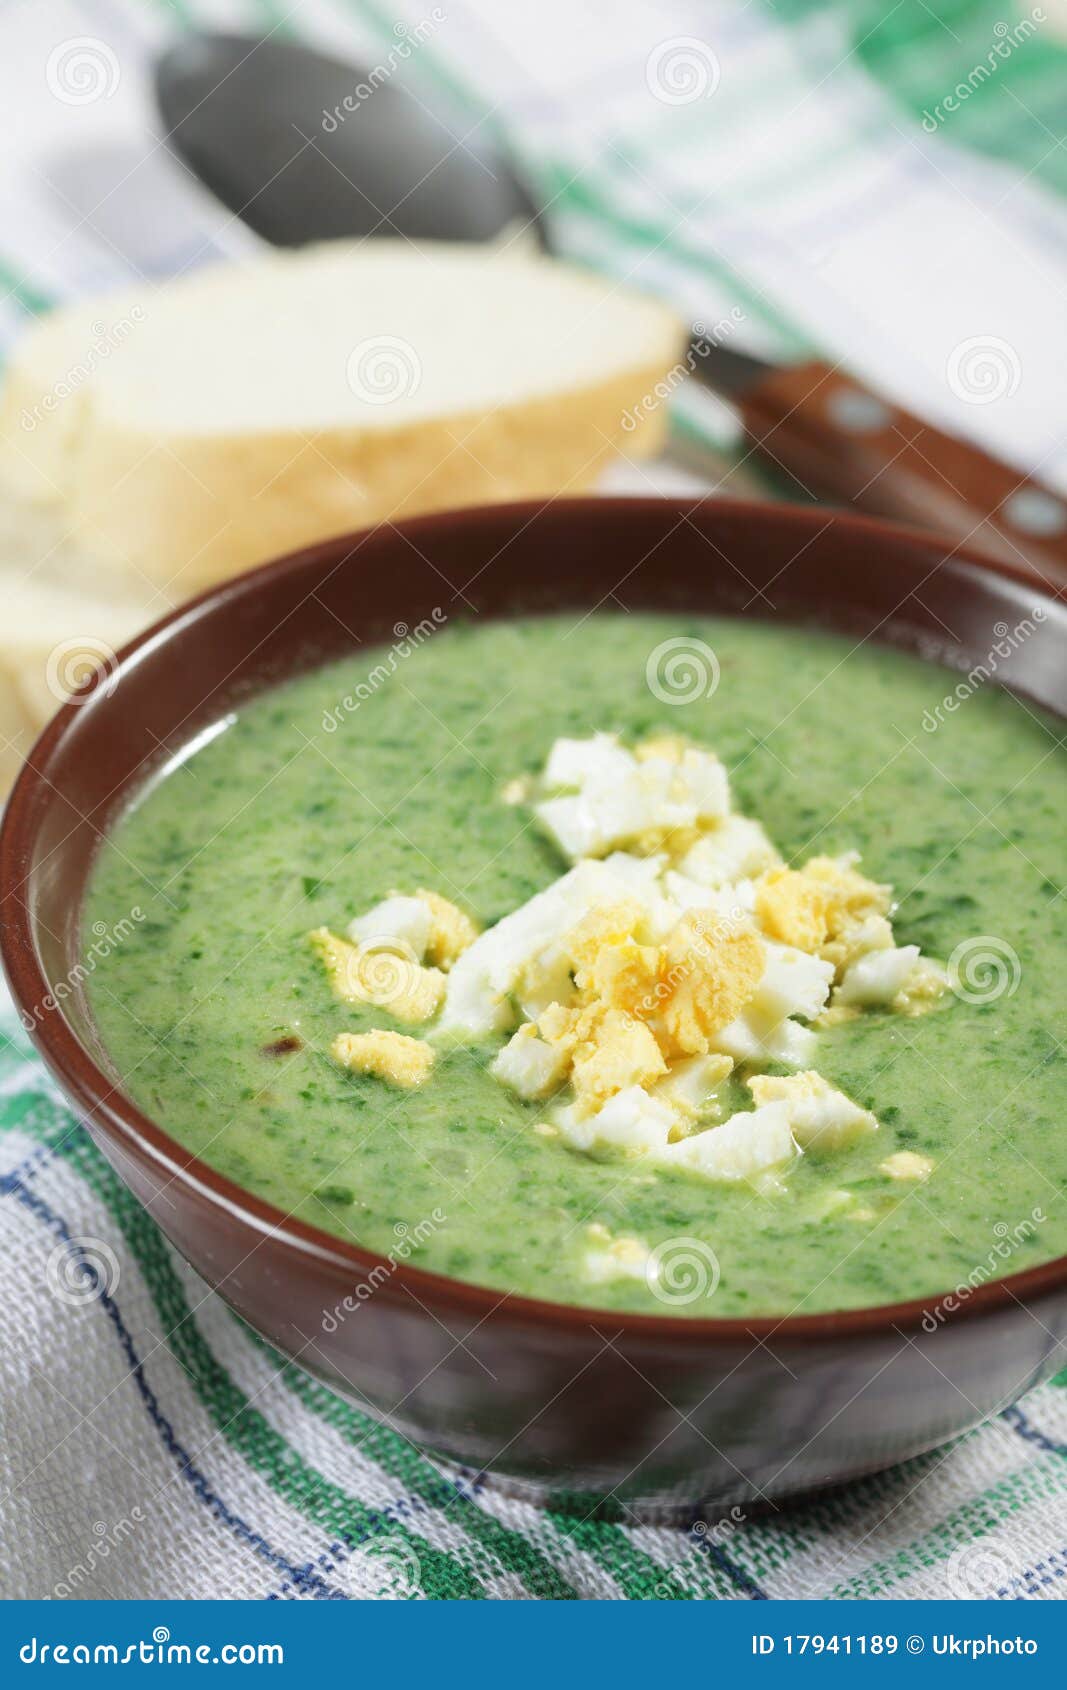 Spinach Soup With Boiled Egg Stock Image - Image of cream ...